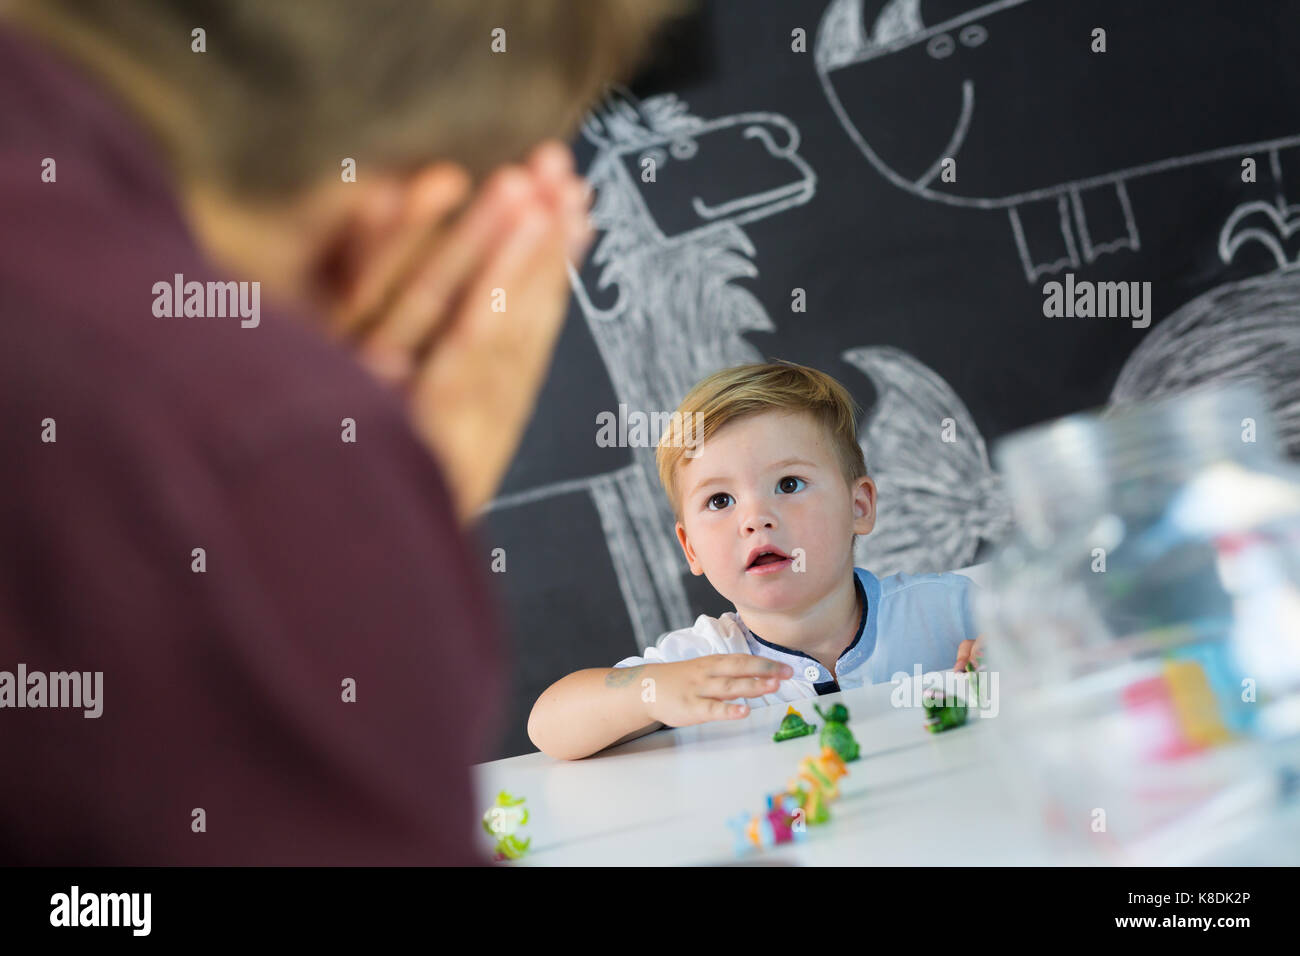 Cute little toddler boy at child therapy session. Stock Photo